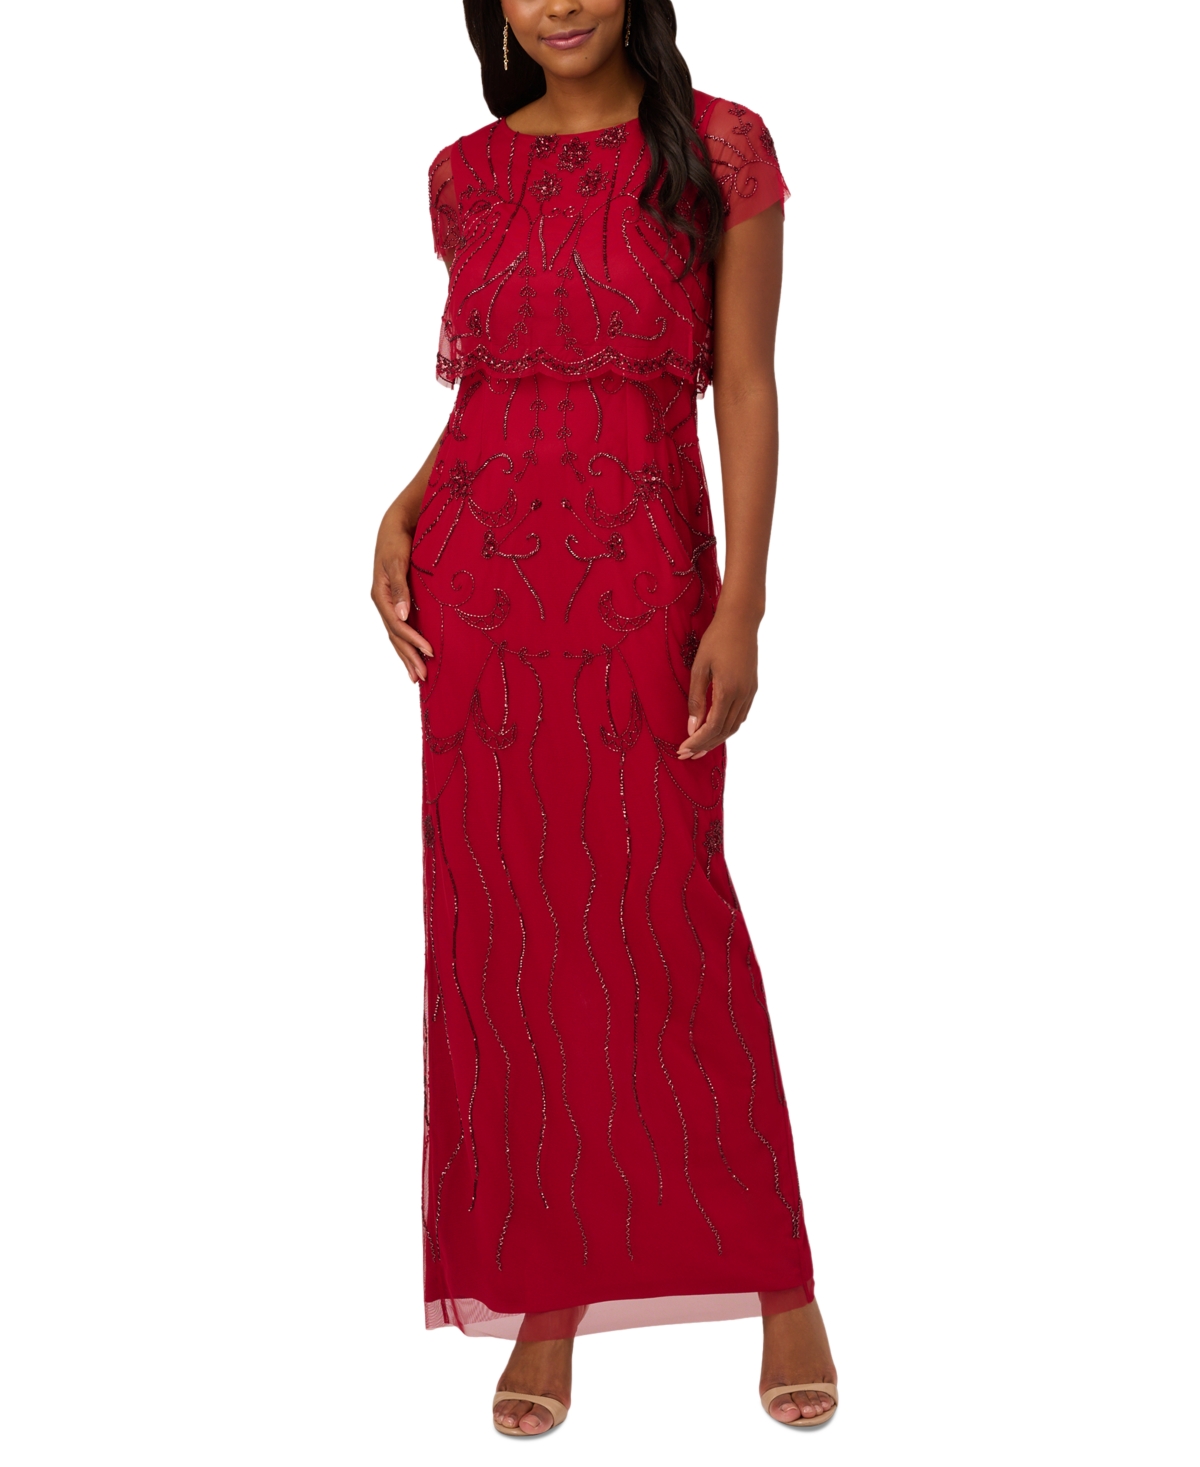 Buy Boardwalk Empire Inspired Dresses Adrianna Papell Petite Beaded Scalloped-Popover Gown - Cranberry $229.00 AT vintagedancer.com